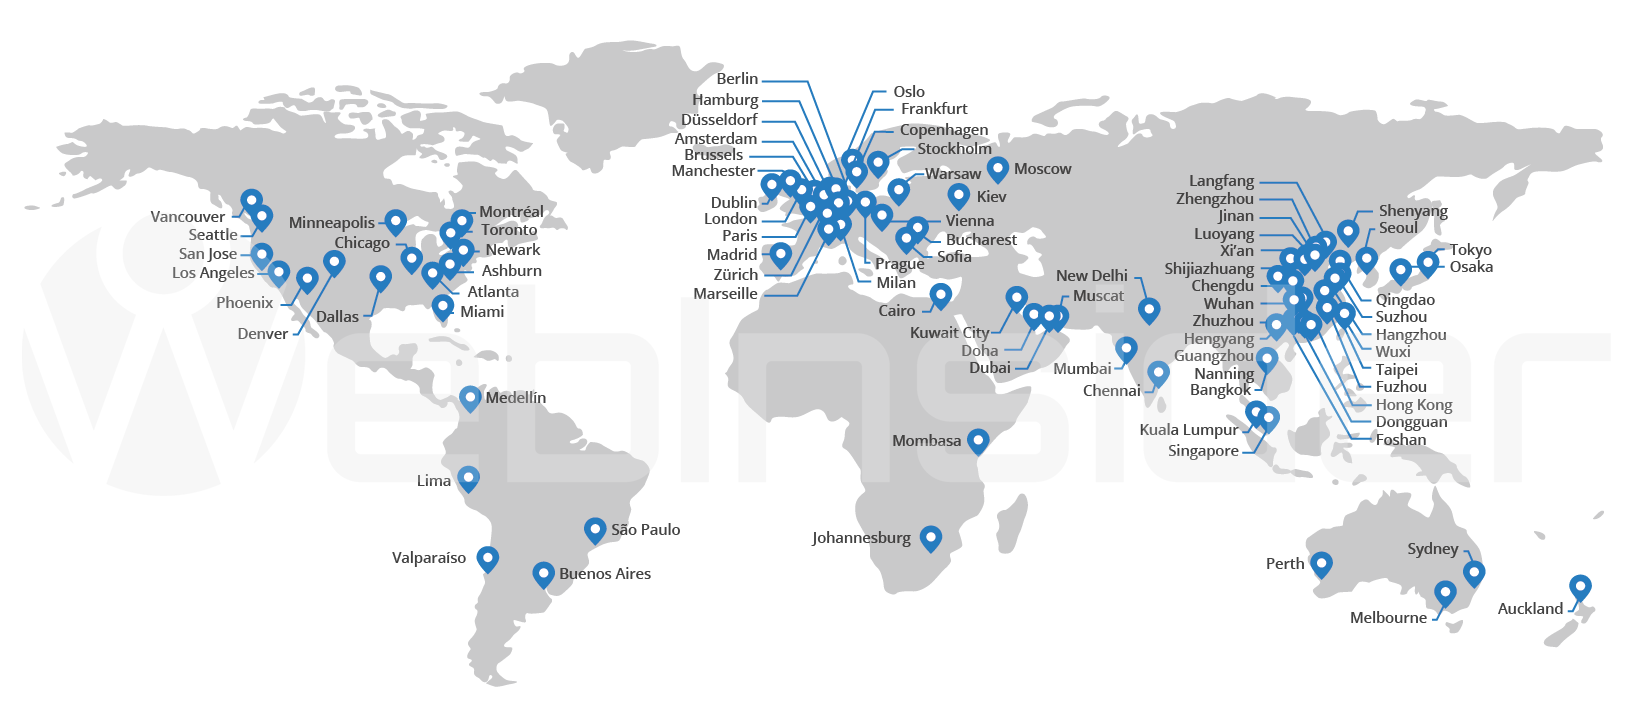 cloudflare_network-map_201606